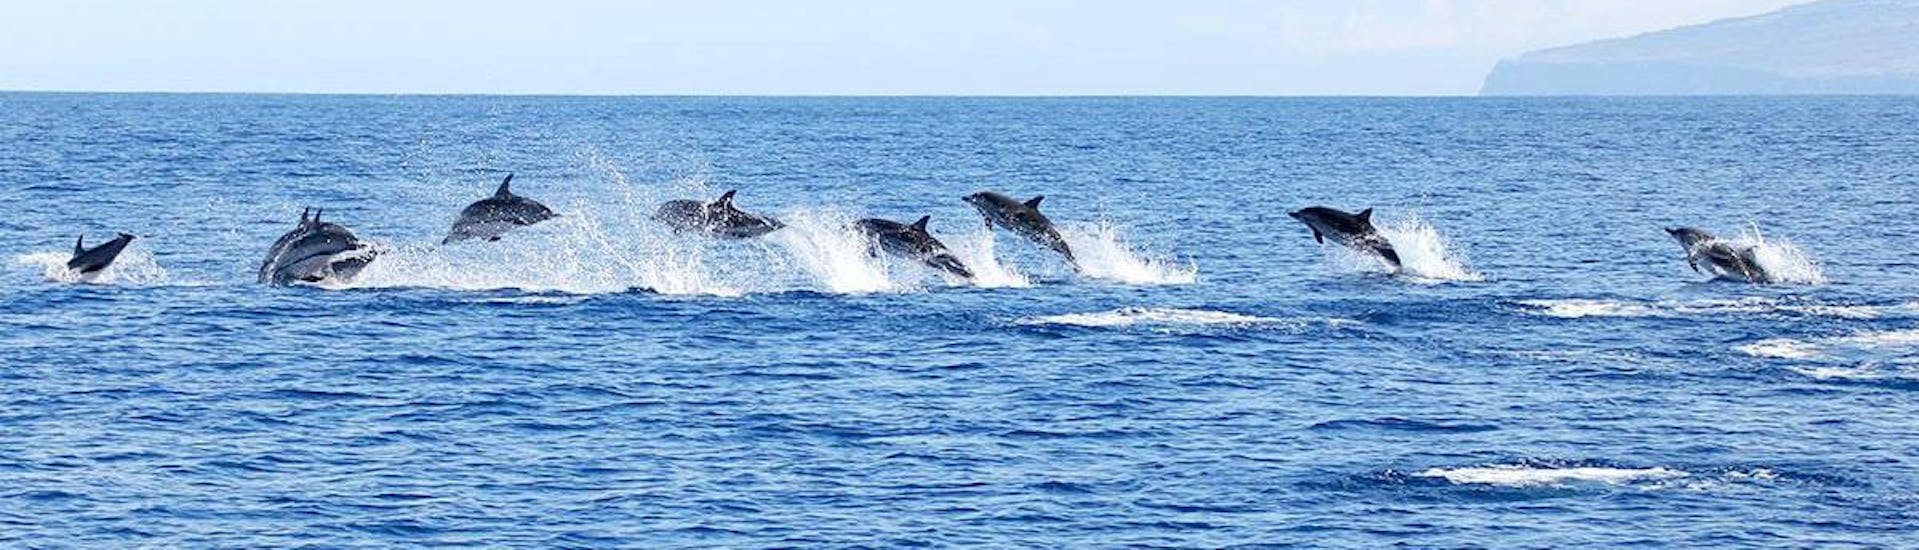 A group of dolphins coming out of the surface during the Sea Experience - Swimming with Dolphins.